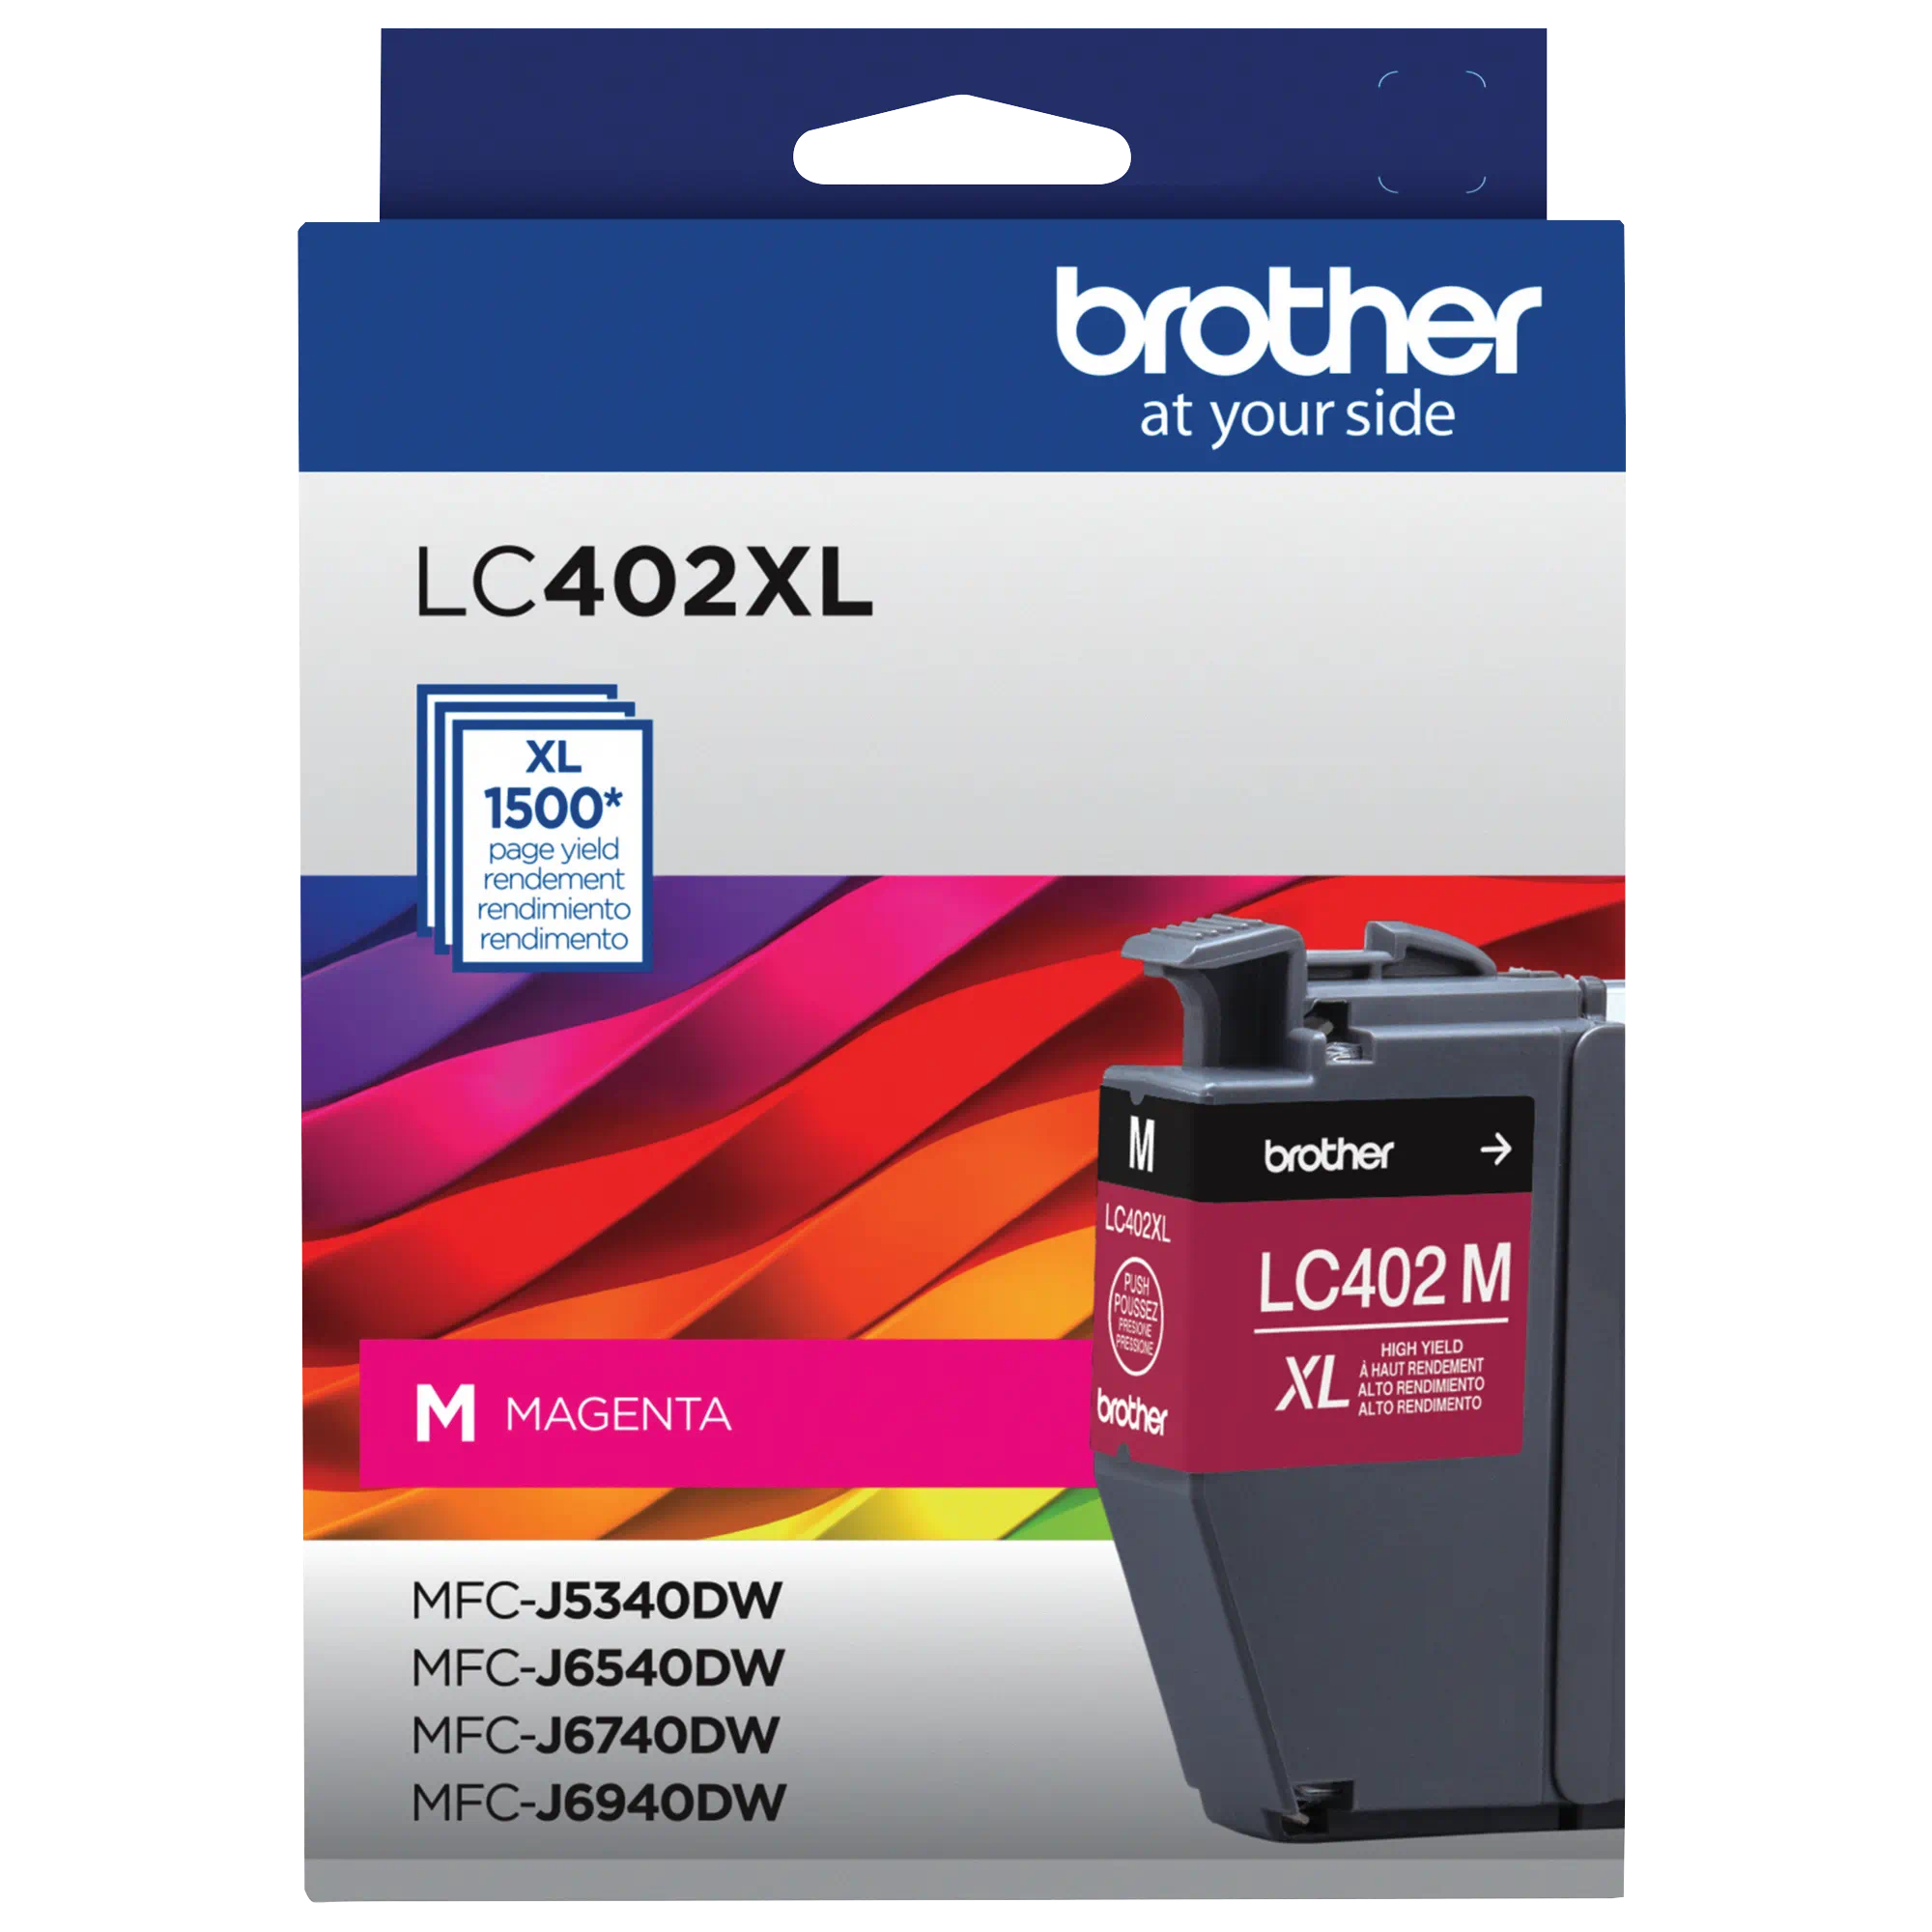 Photos - Ink & Toner Cartridge Brother High-yield Ink, Magenta, Yields approx 1500 pages LC402XLMS 